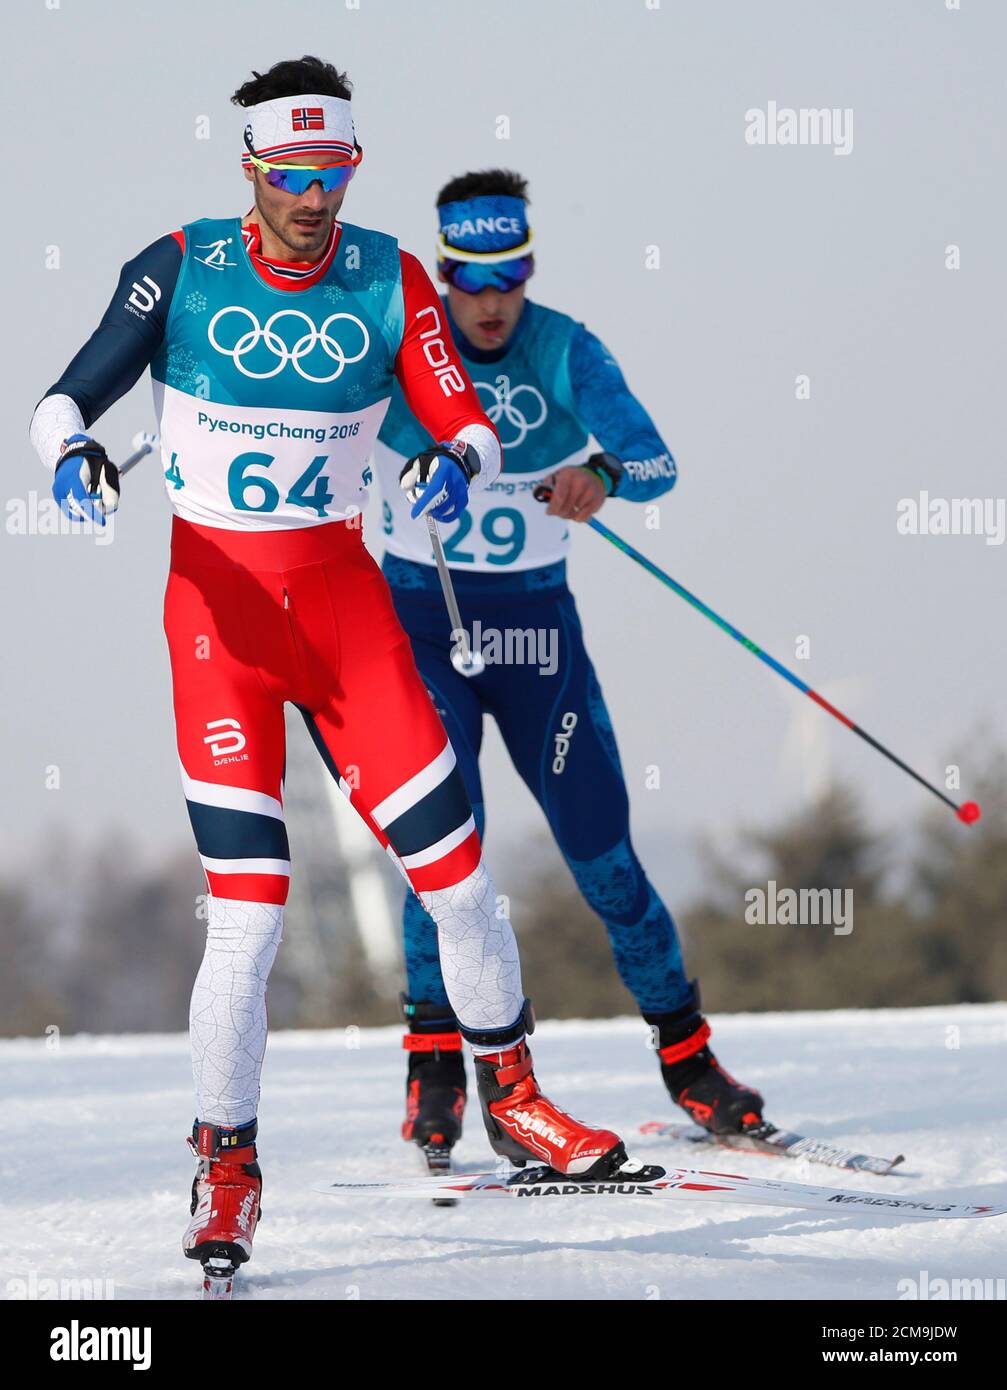 Cross-Country Skiing – Pyeongchang 2018 Winter Olympics – Men's 15km Free – Alpensia Cross-Country Skiing Centre – Pyeongchang, South Korea – February 16, 2018 - Hans Christer Holund of Norway and Adrien Backscheider of France compete. REUTERS/Murad Sezer Stock Photo